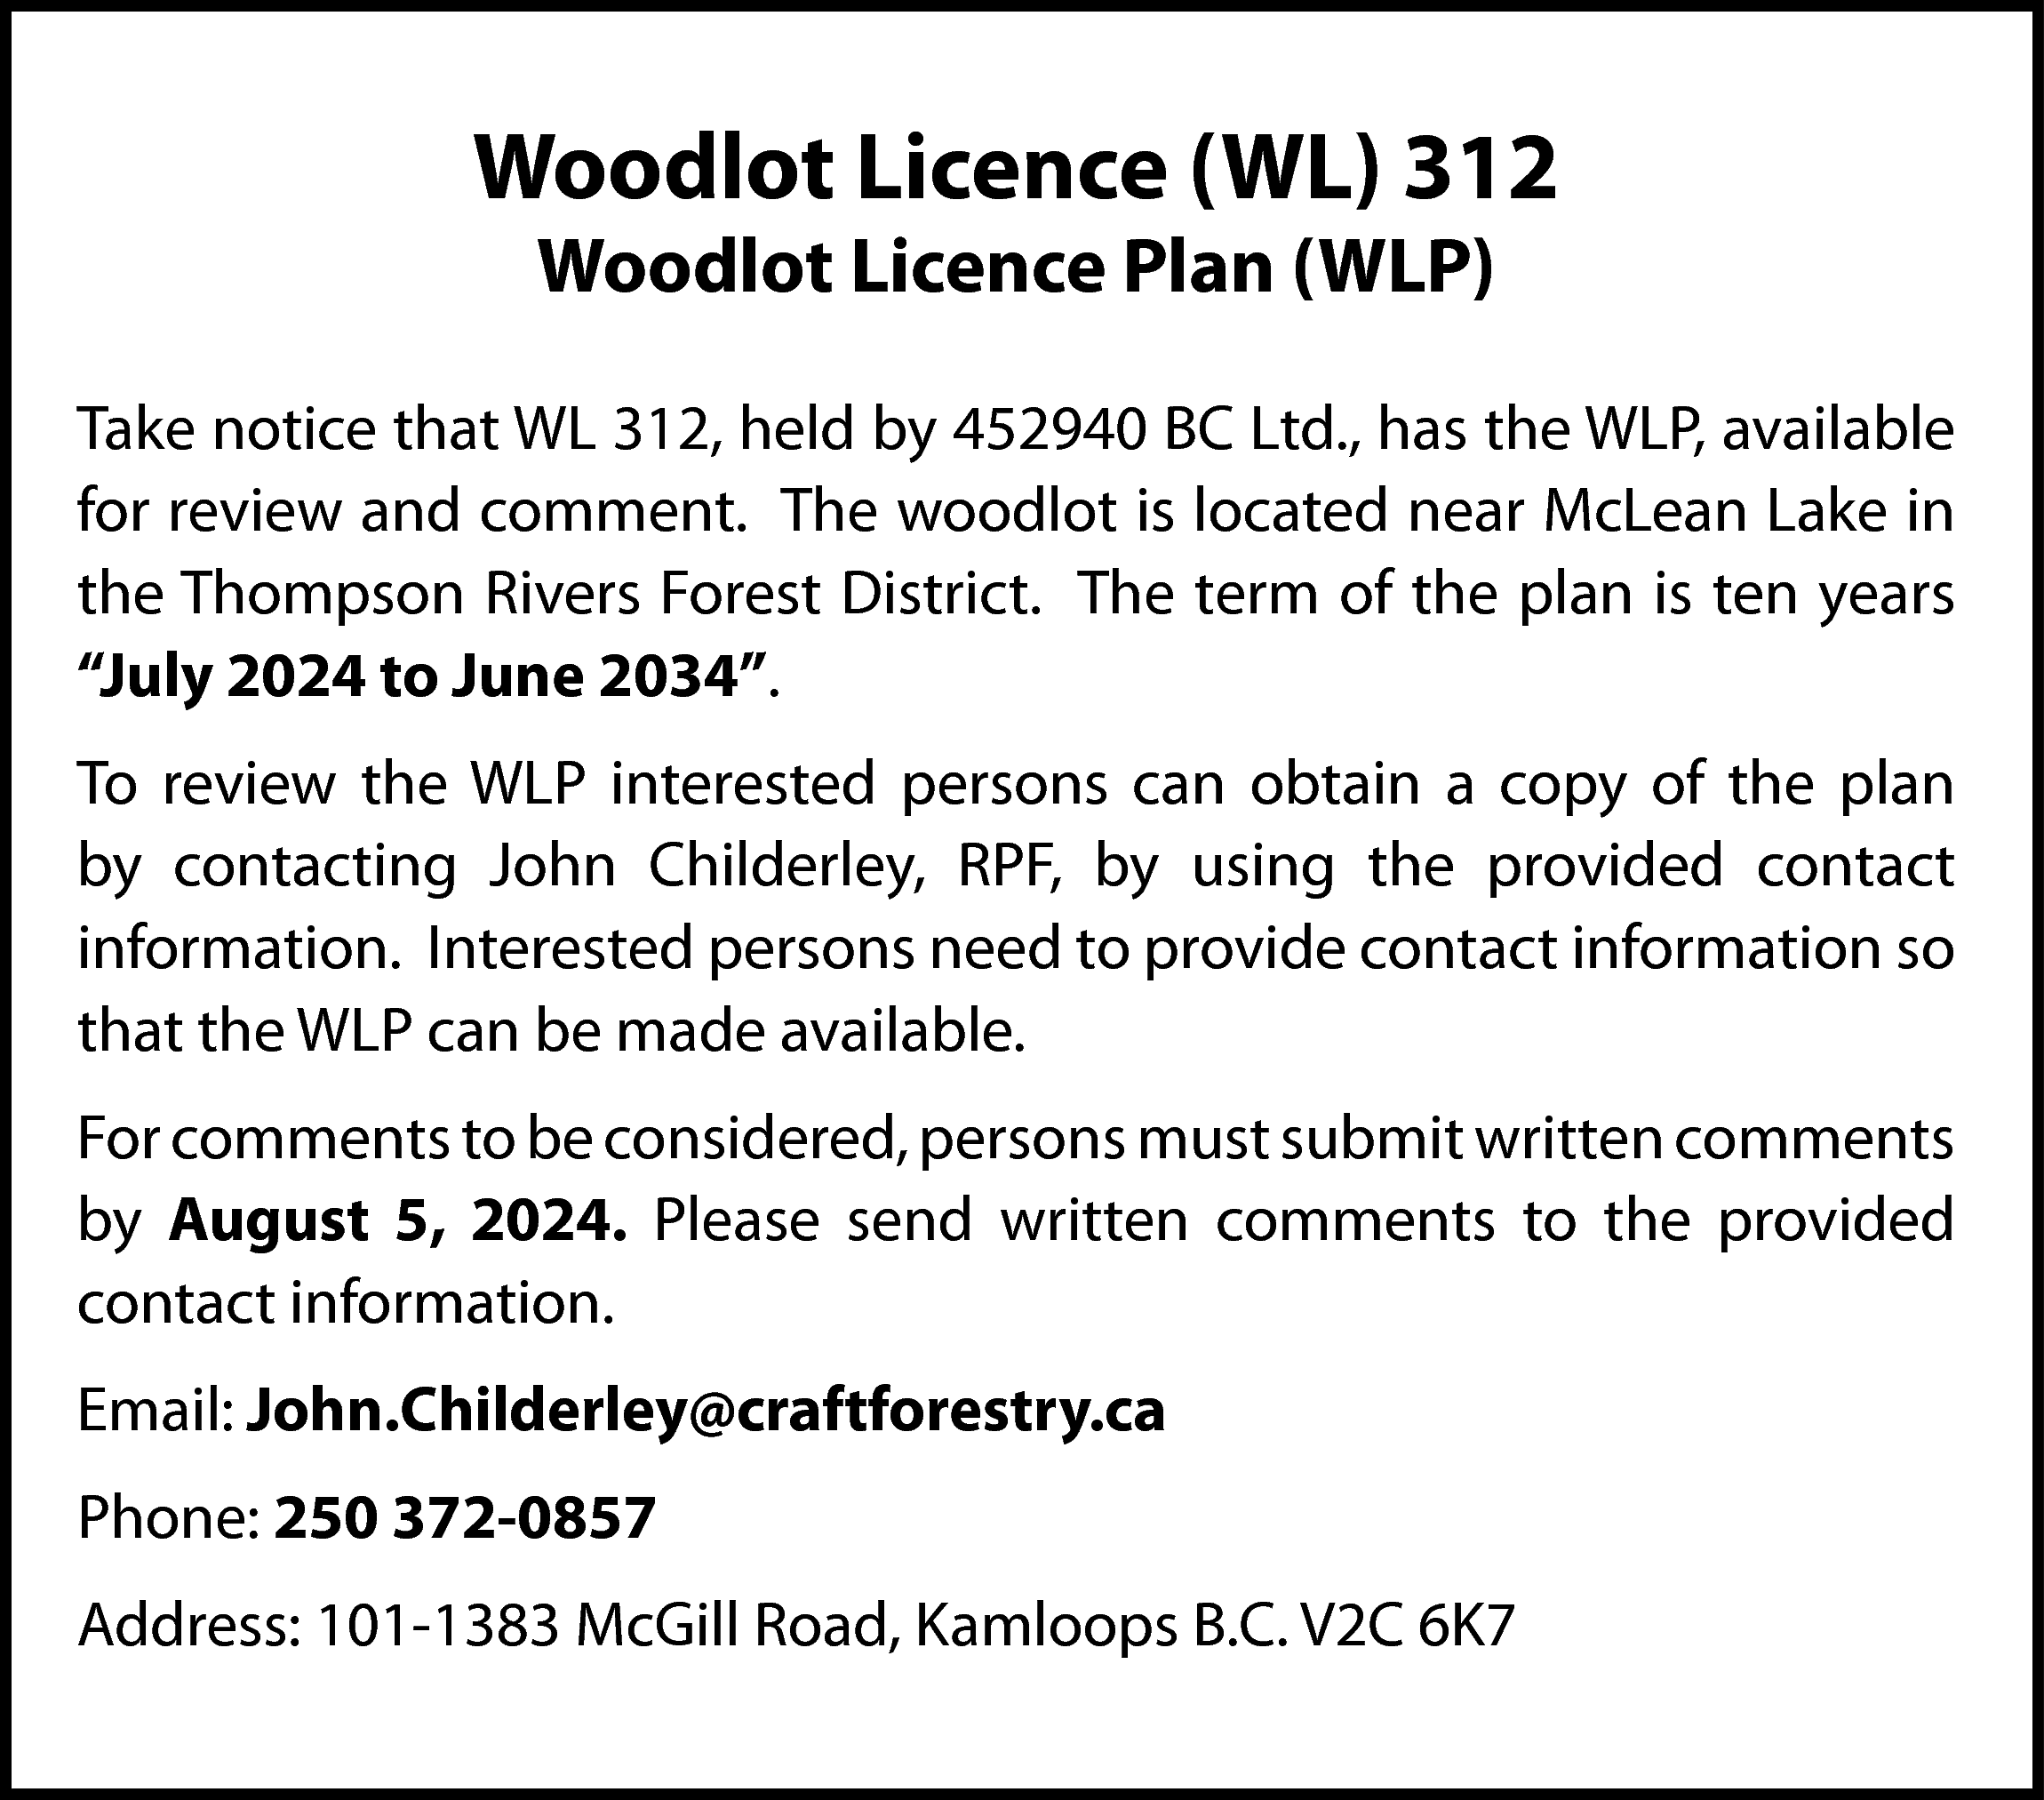 Woodlot Licence (WL) 312 <br>Woodlot  Woodlot Licence (WL) 312  Woodlot Licence Plan (WLP)    Take notice that WL 312, held by 452940 BC Ltd., has the WLP, available  for review and comment. The woodlot is located near McLean Lake in  the Thompson Rivers Forest District. The term of the plan is ten years  “July 2024 to June 2034”.  To review the WLP interested persons can obtain a copy of the plan  by contacting John Childerley, RPF, by using the provided contact  information. Interested persons need to provide contact information so  that the WLP can be made available.  For comments to be considered, persons must submit written comments  by August 5, 2024. Please send written comments to the provided  contact information.  Email: John.Childerley@craftforestry.ca  Phone: 250 372-0857  Address: 101-1383 McGill Road, Kamloops B.C. V2C 6K7    